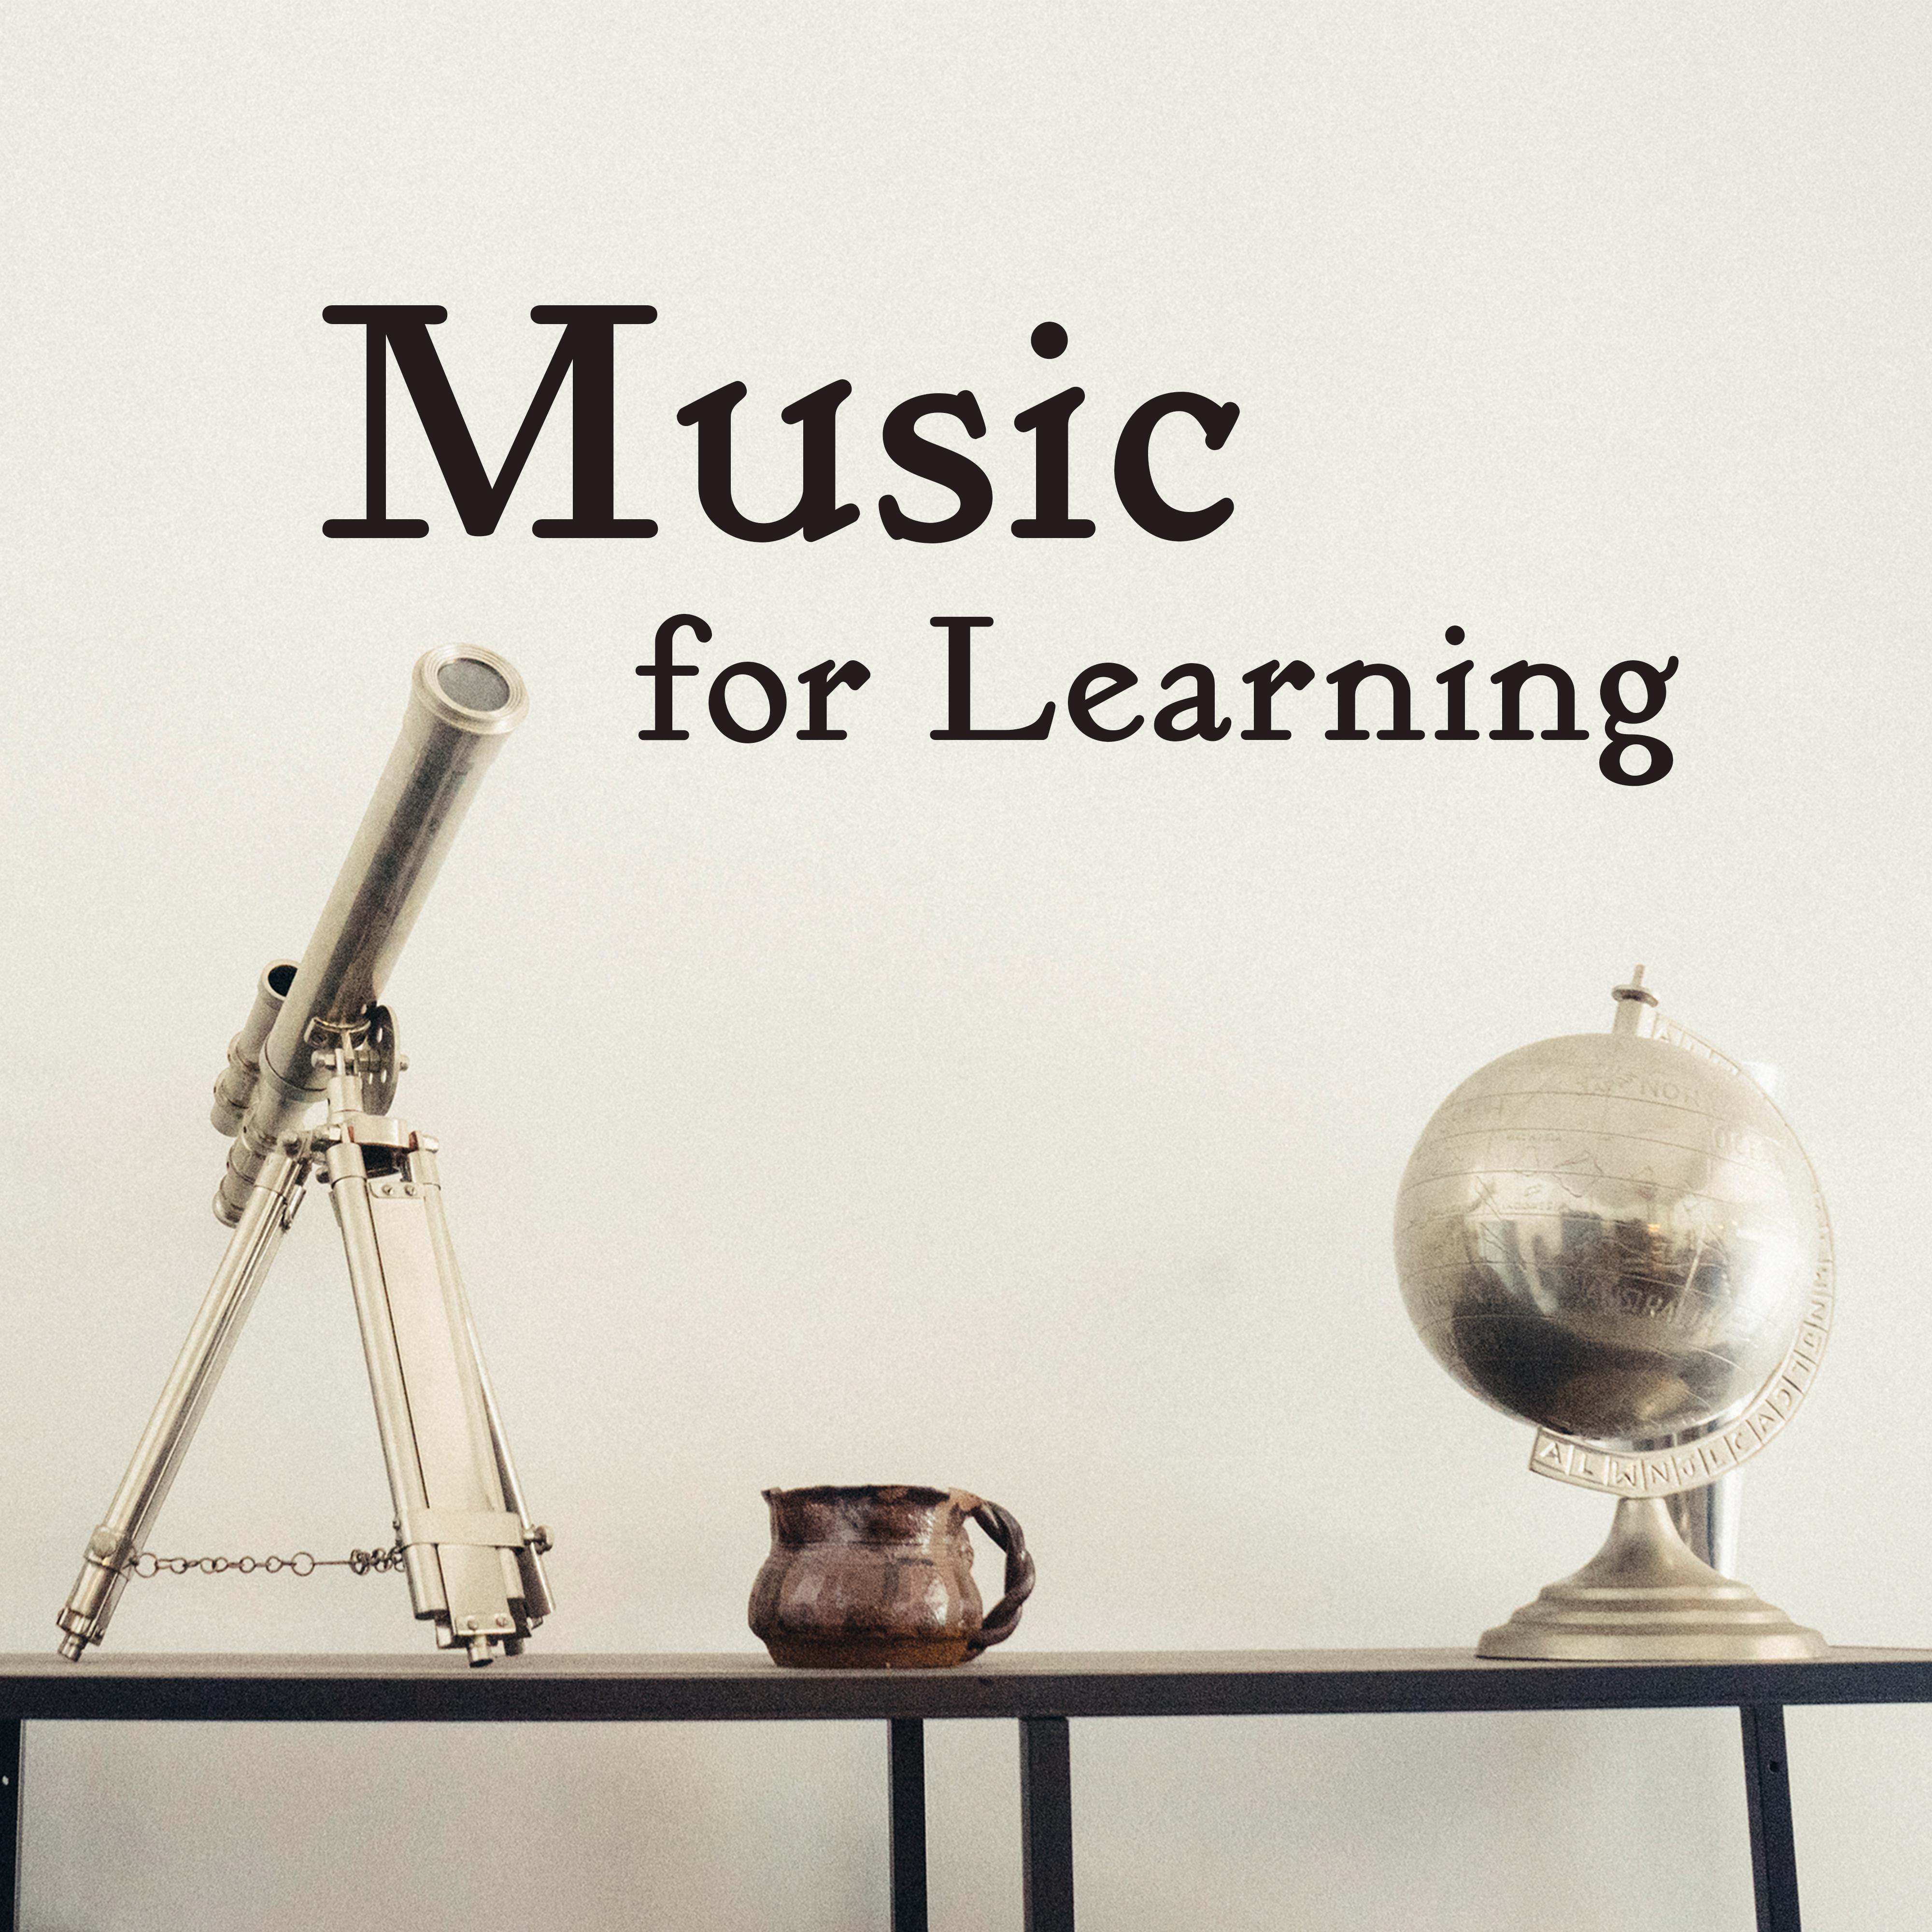 Music for Learning  Classic Music for Learning, Reading, Study, Keep Focus, Easy Work